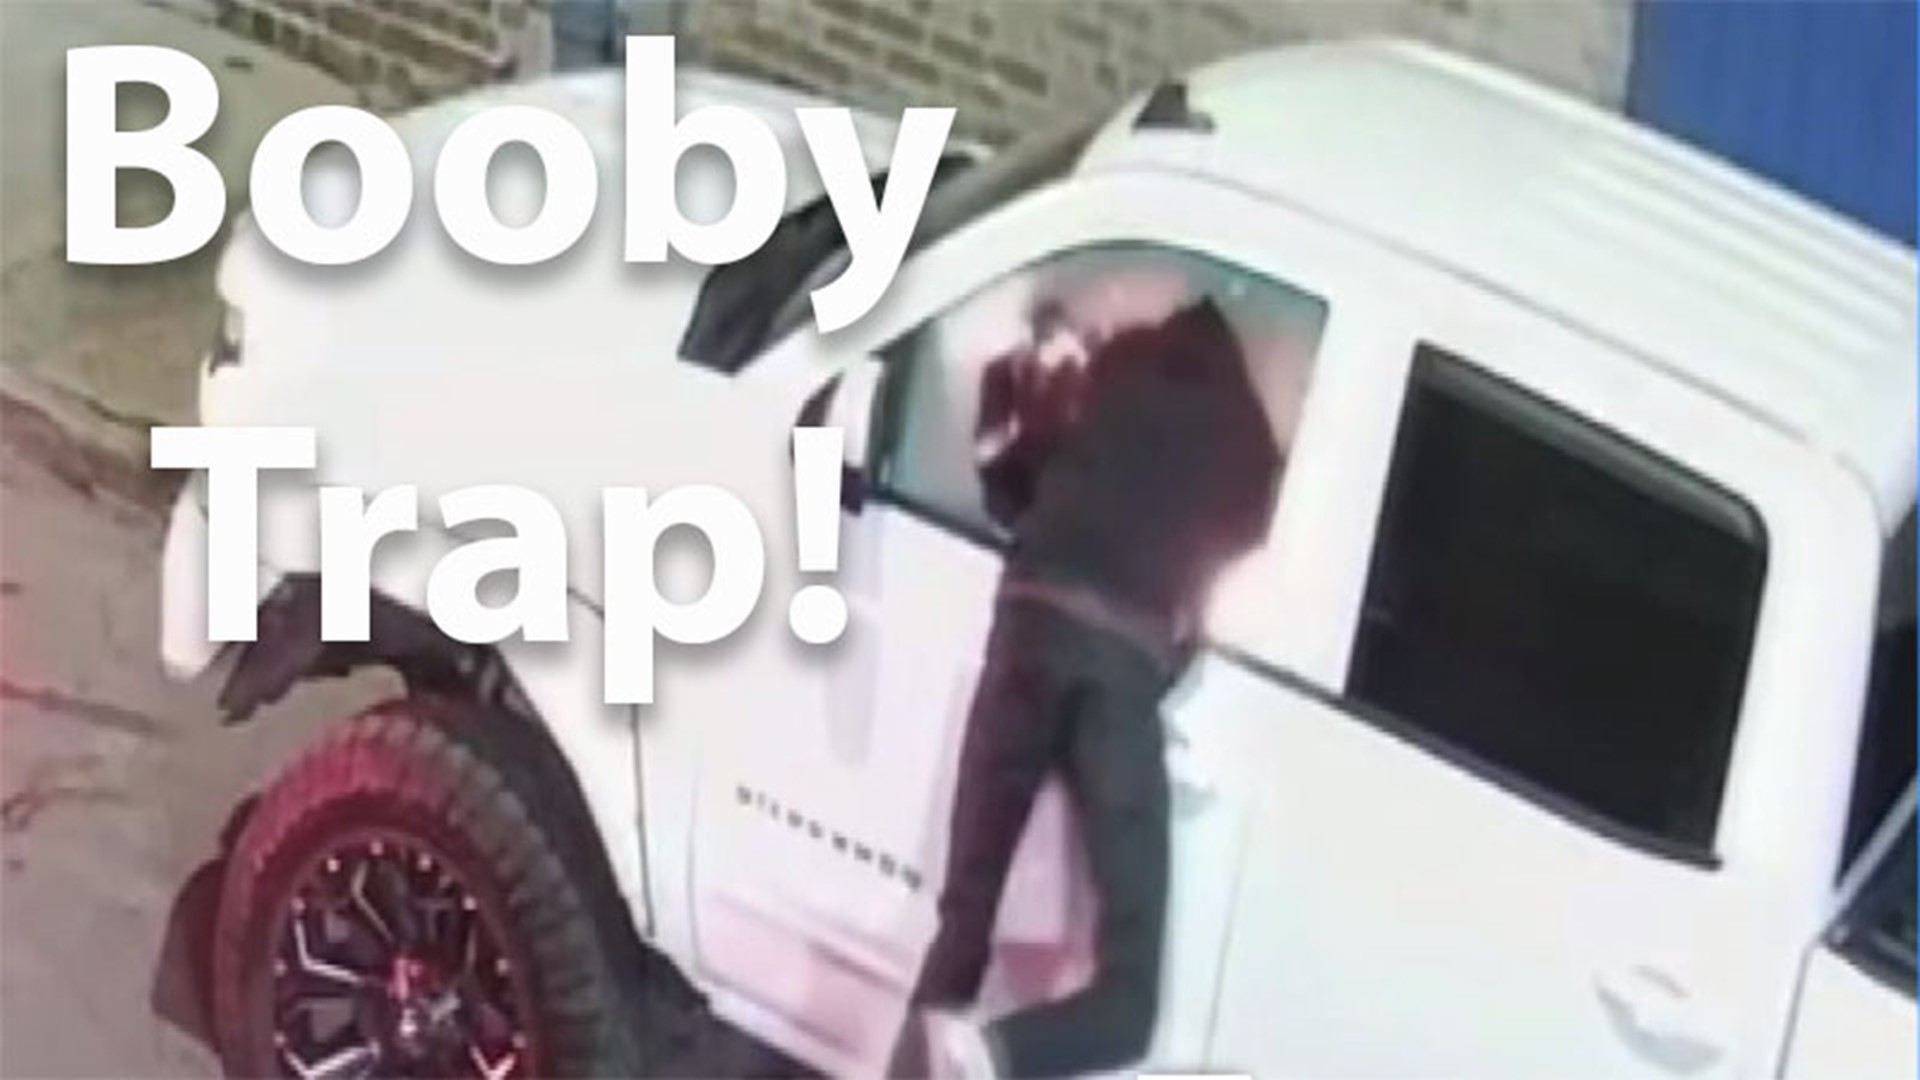 A man tired of having his truck broken into has taken matters into his own hands as he booby traps his property.